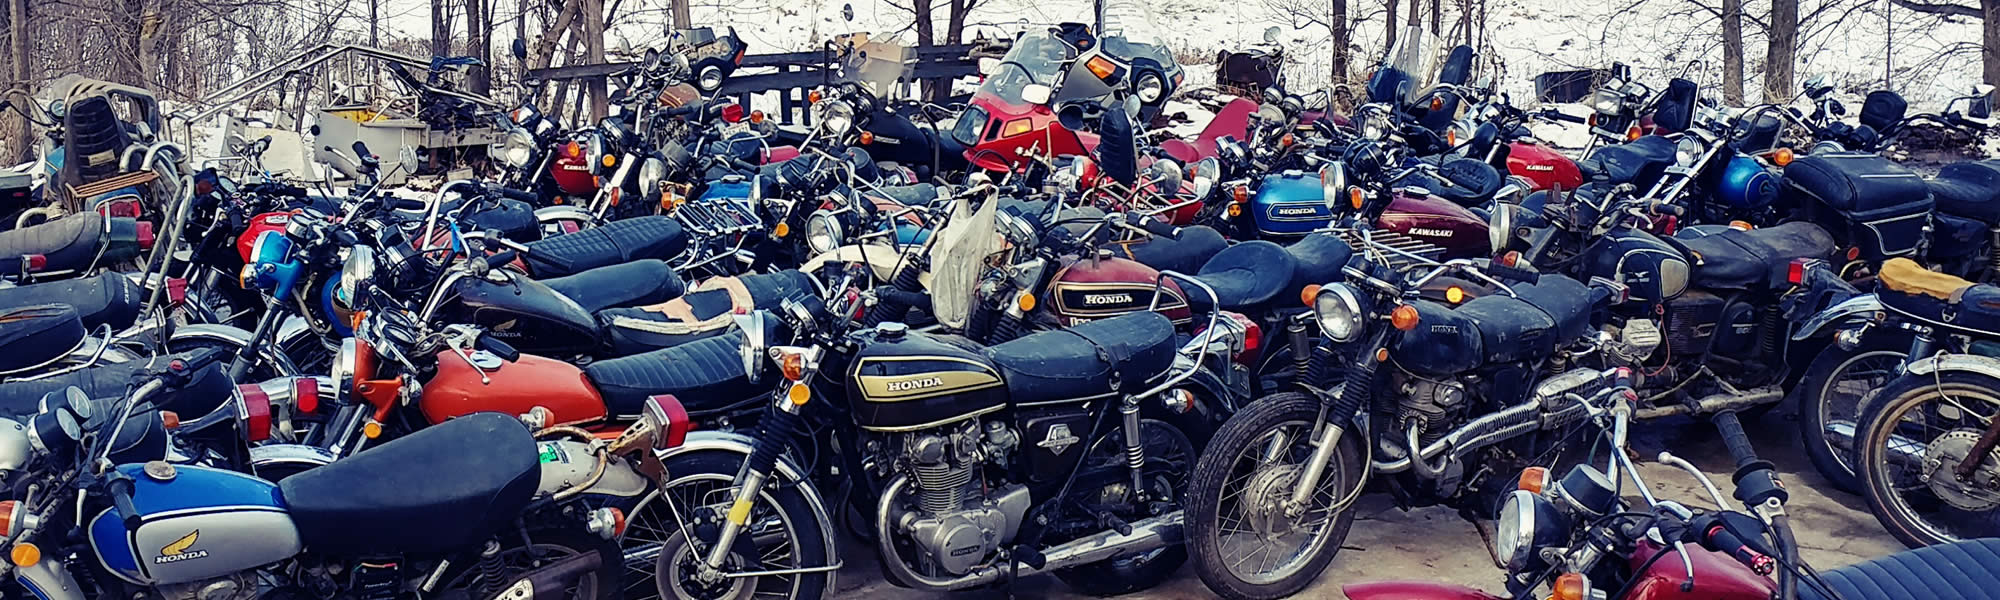 Sell Your Old/Vintage Motorcycles